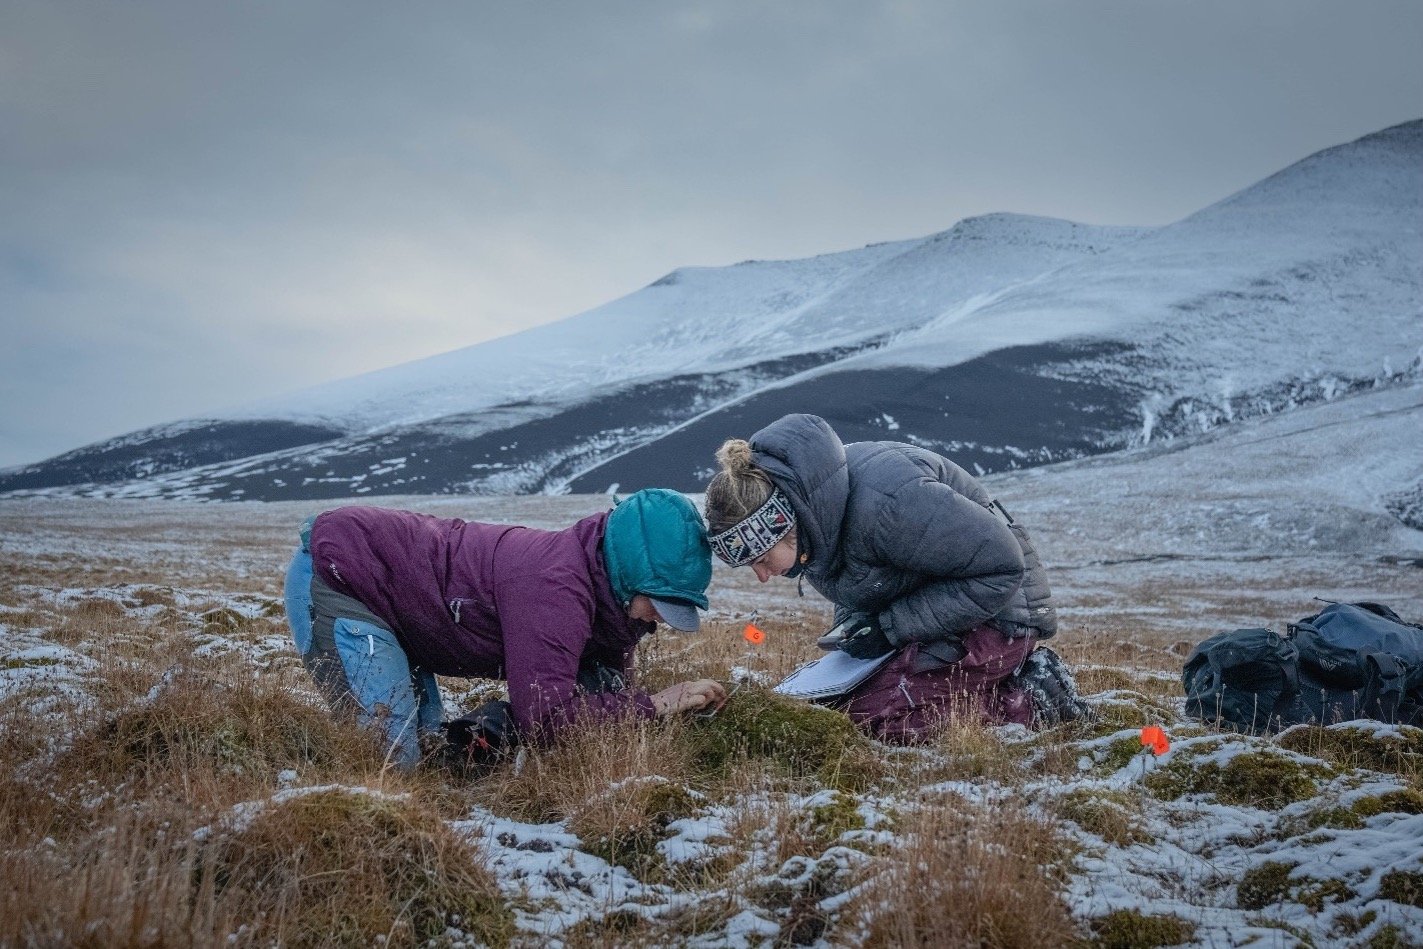  Samantha Dwinnell and Oline Eikeland investigating the plants eaten at the exact grazing spot of a GPS-collared Svalbard reindeer. Photo: Morgan Heim 